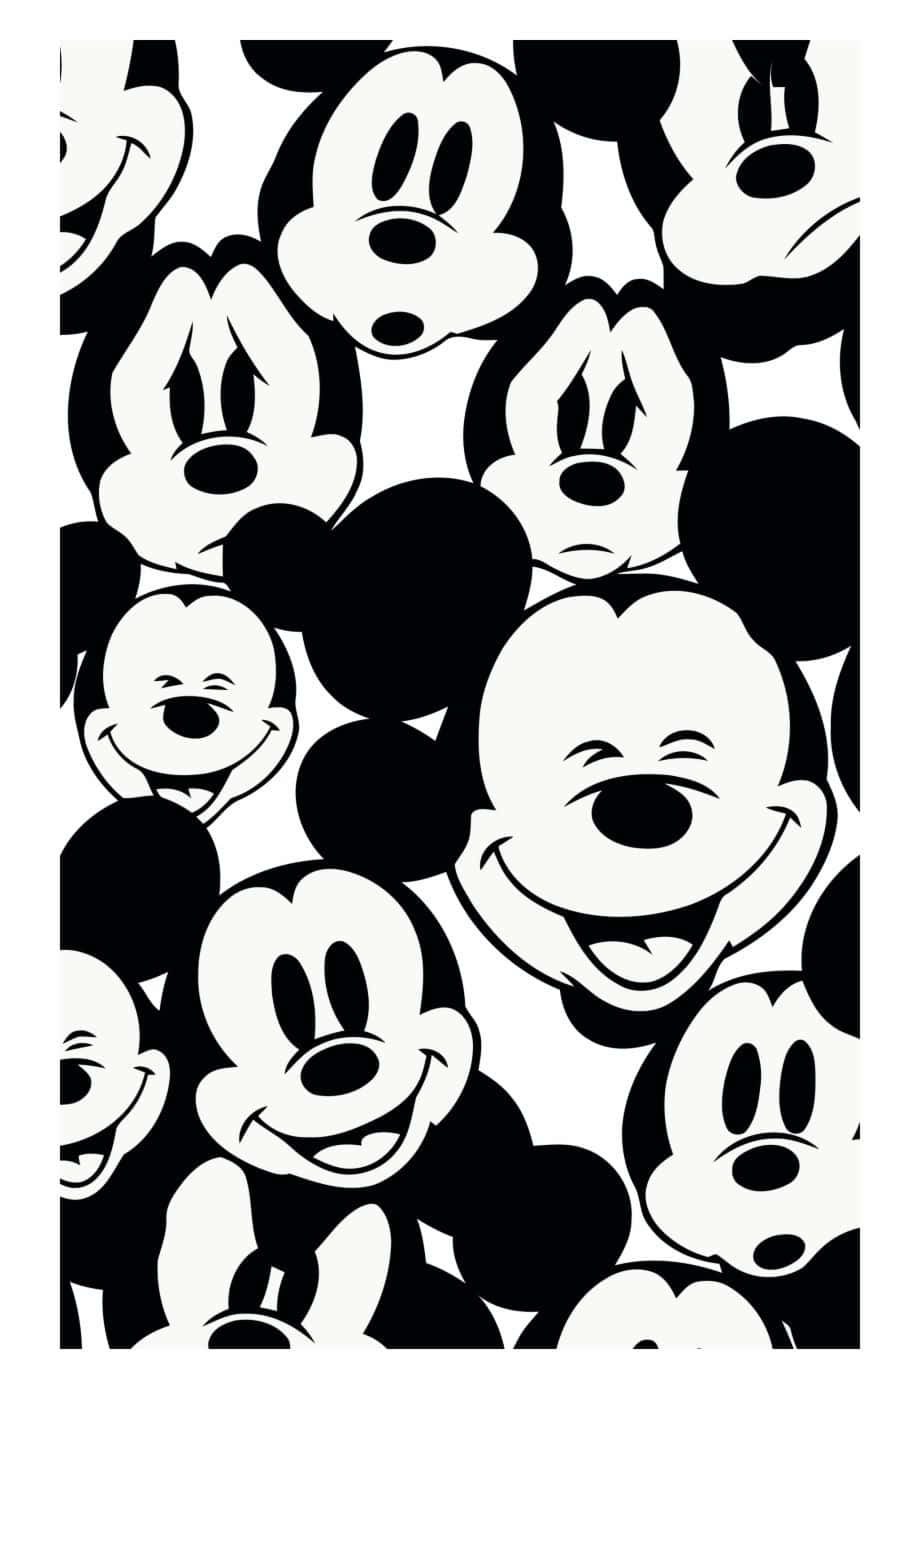 mickey mouse black and white wallpaper hd